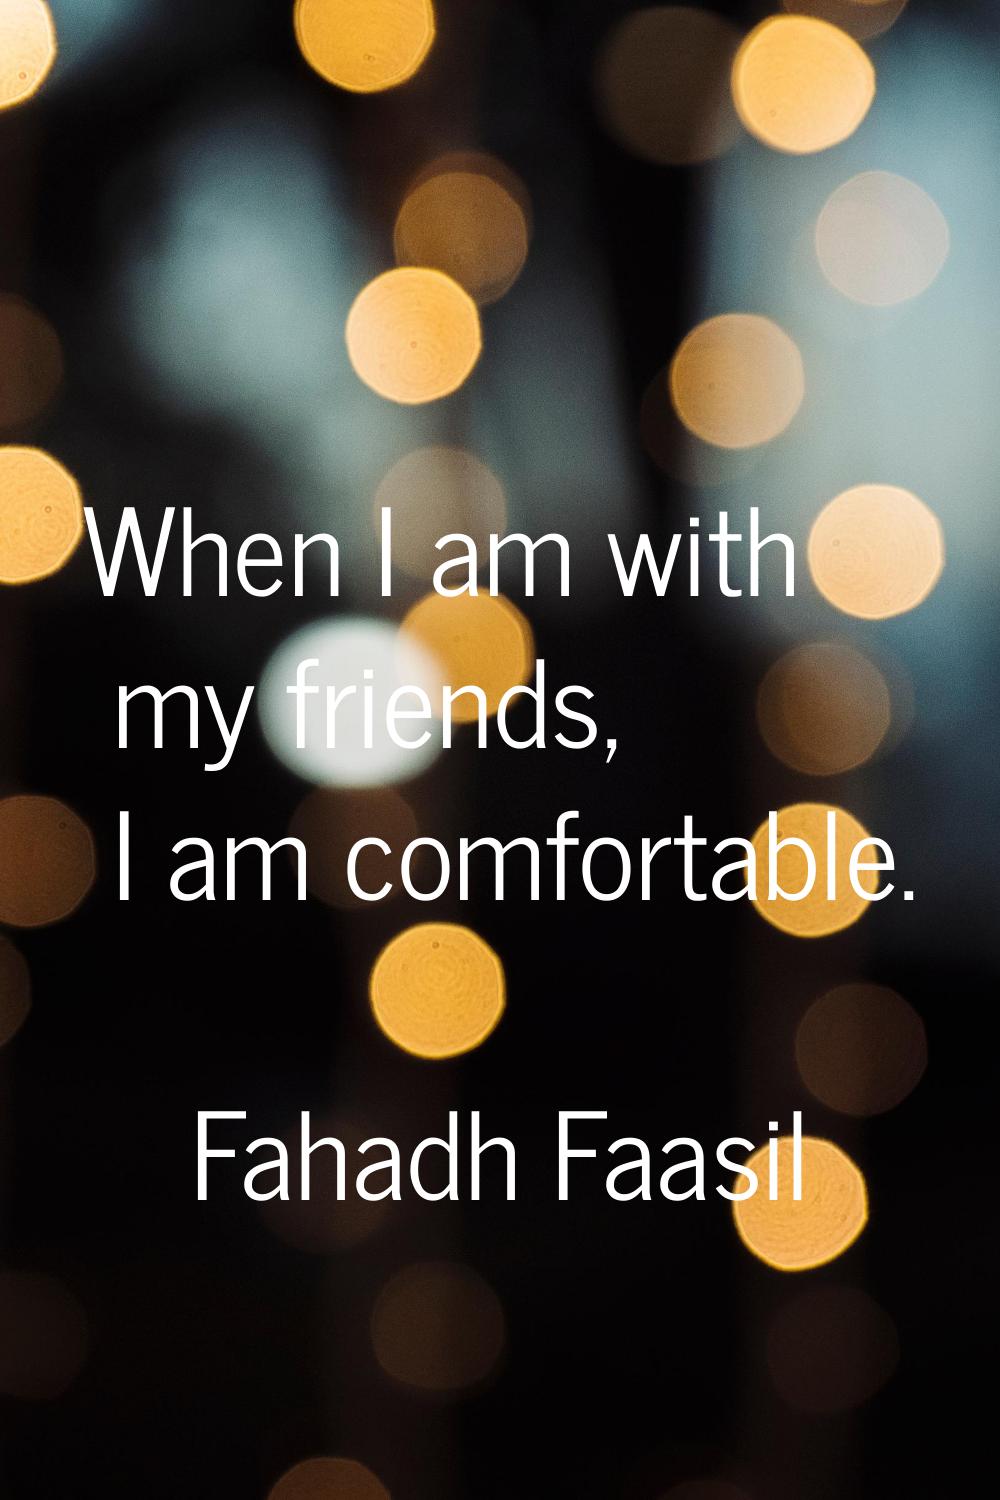 When I am with my friends, I am comfortable.